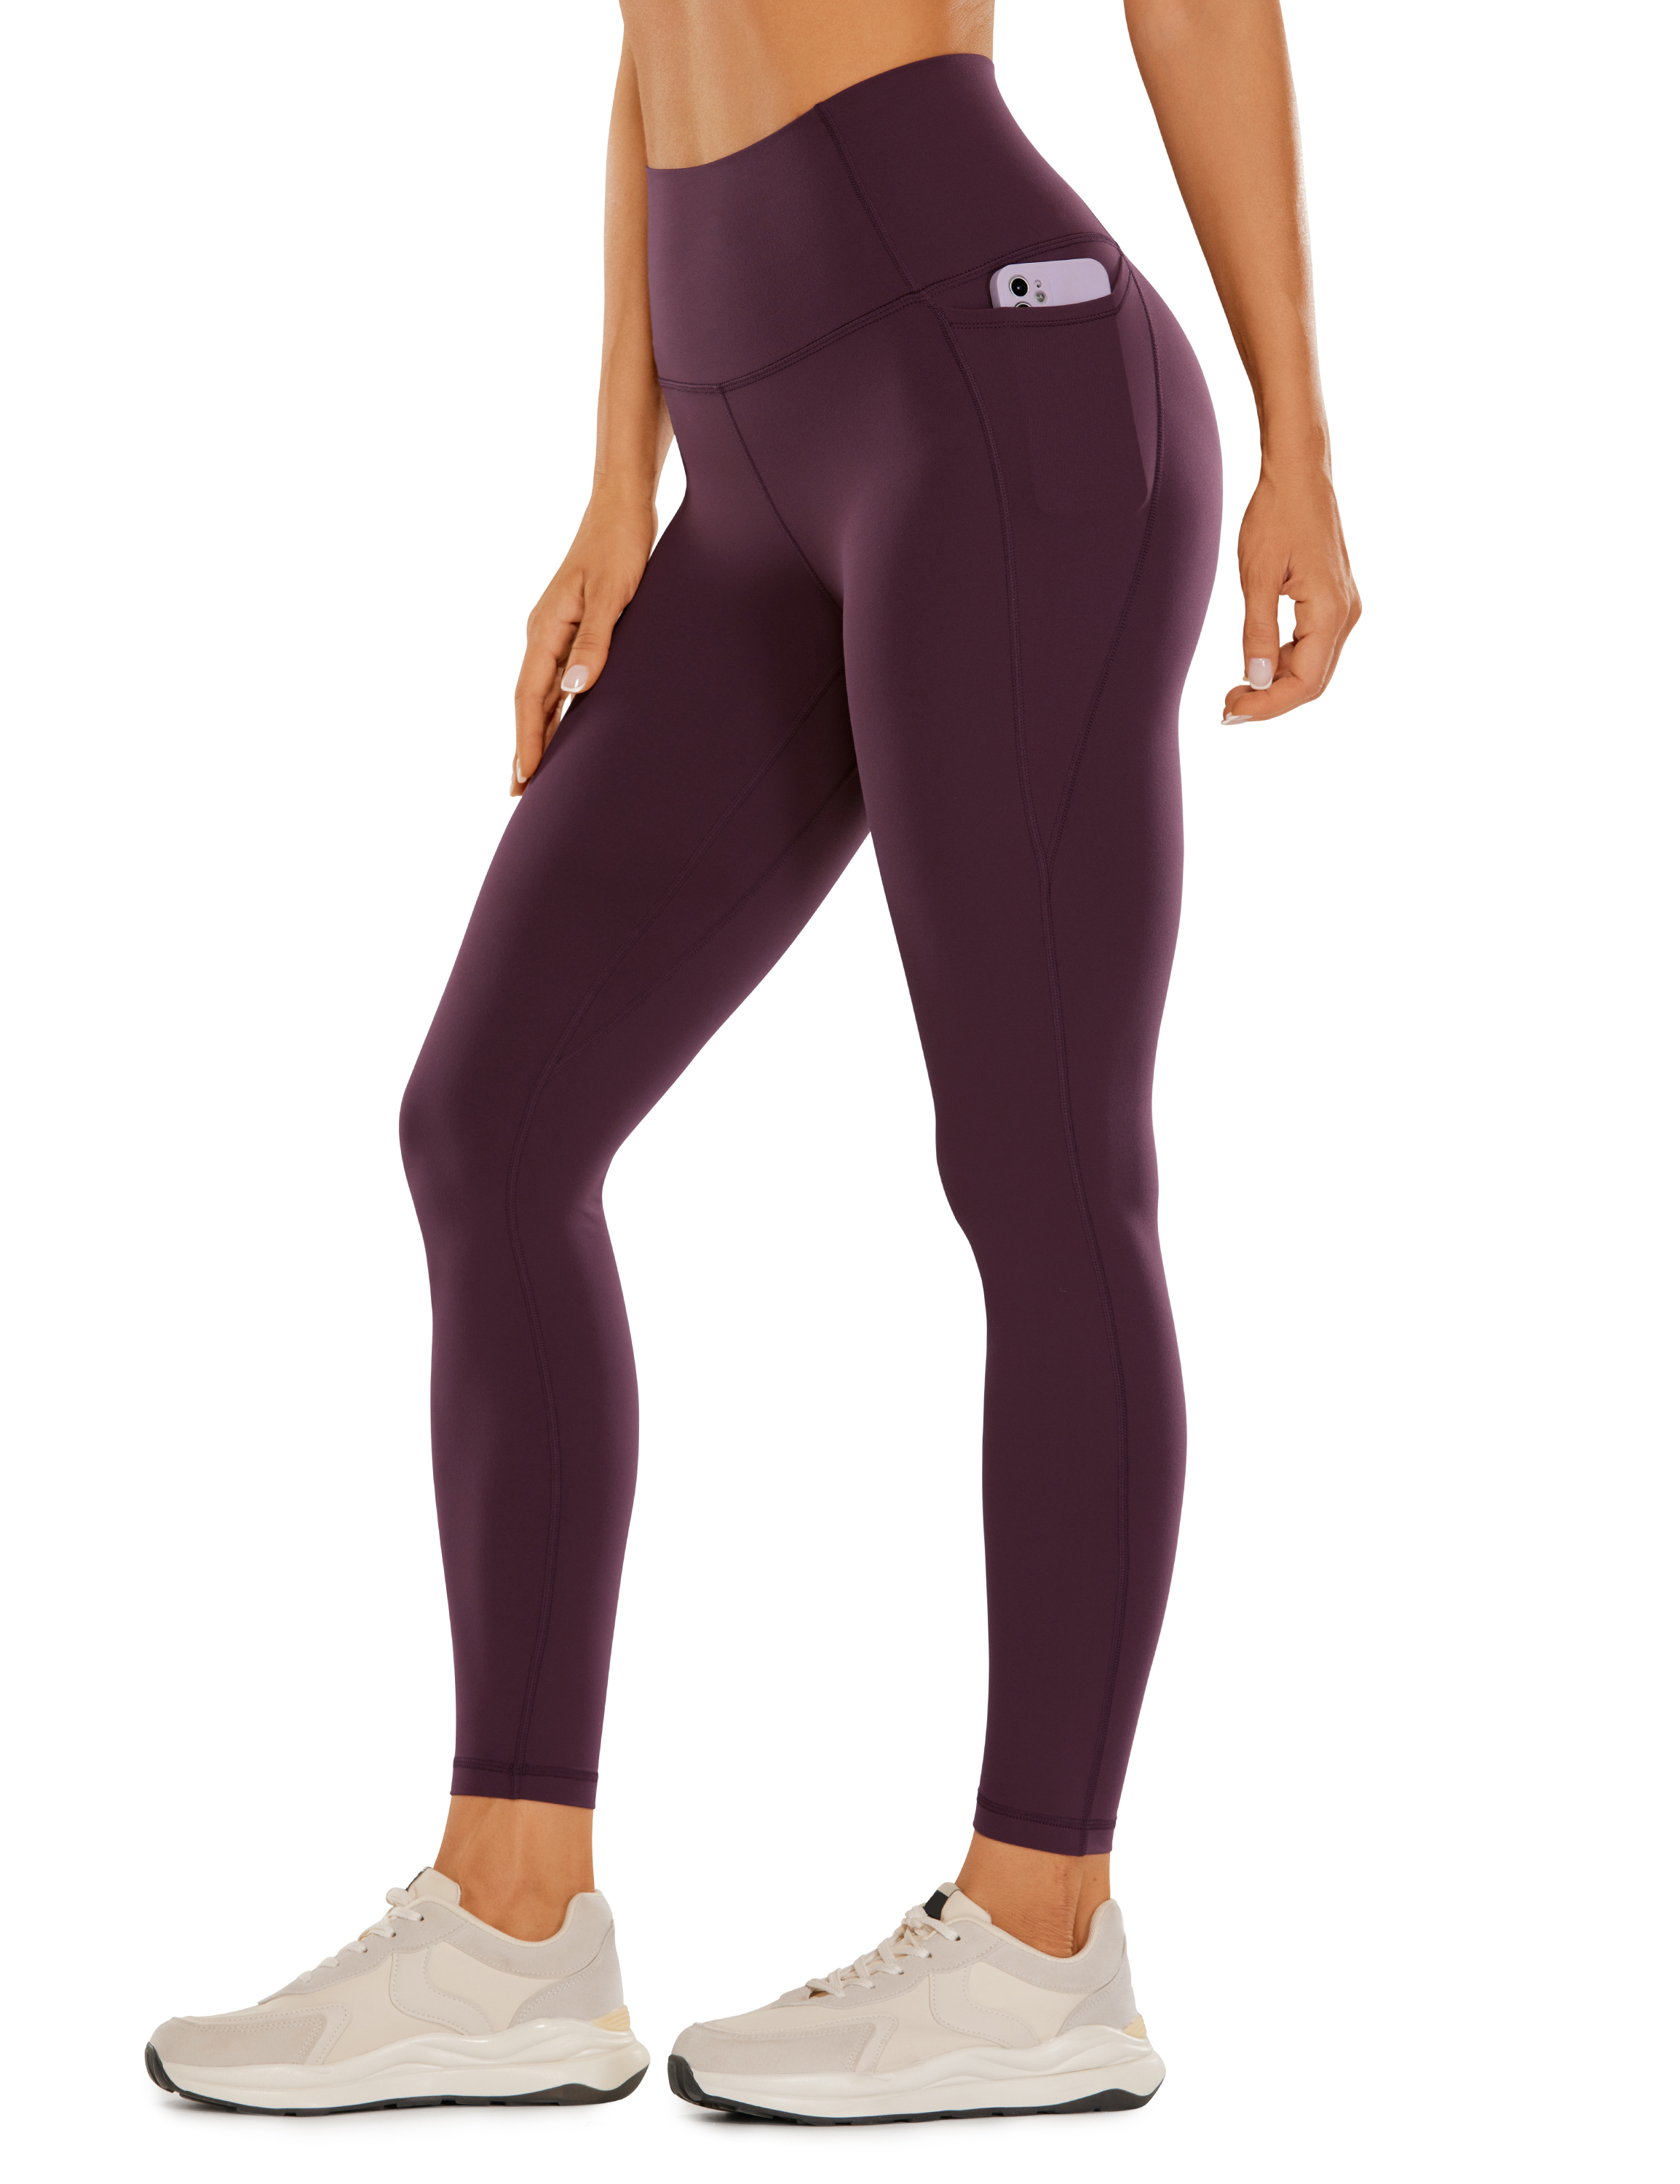 CRZ YOGA Womens Butterluxe Yoga Leggings 25 Inches - High Waisted